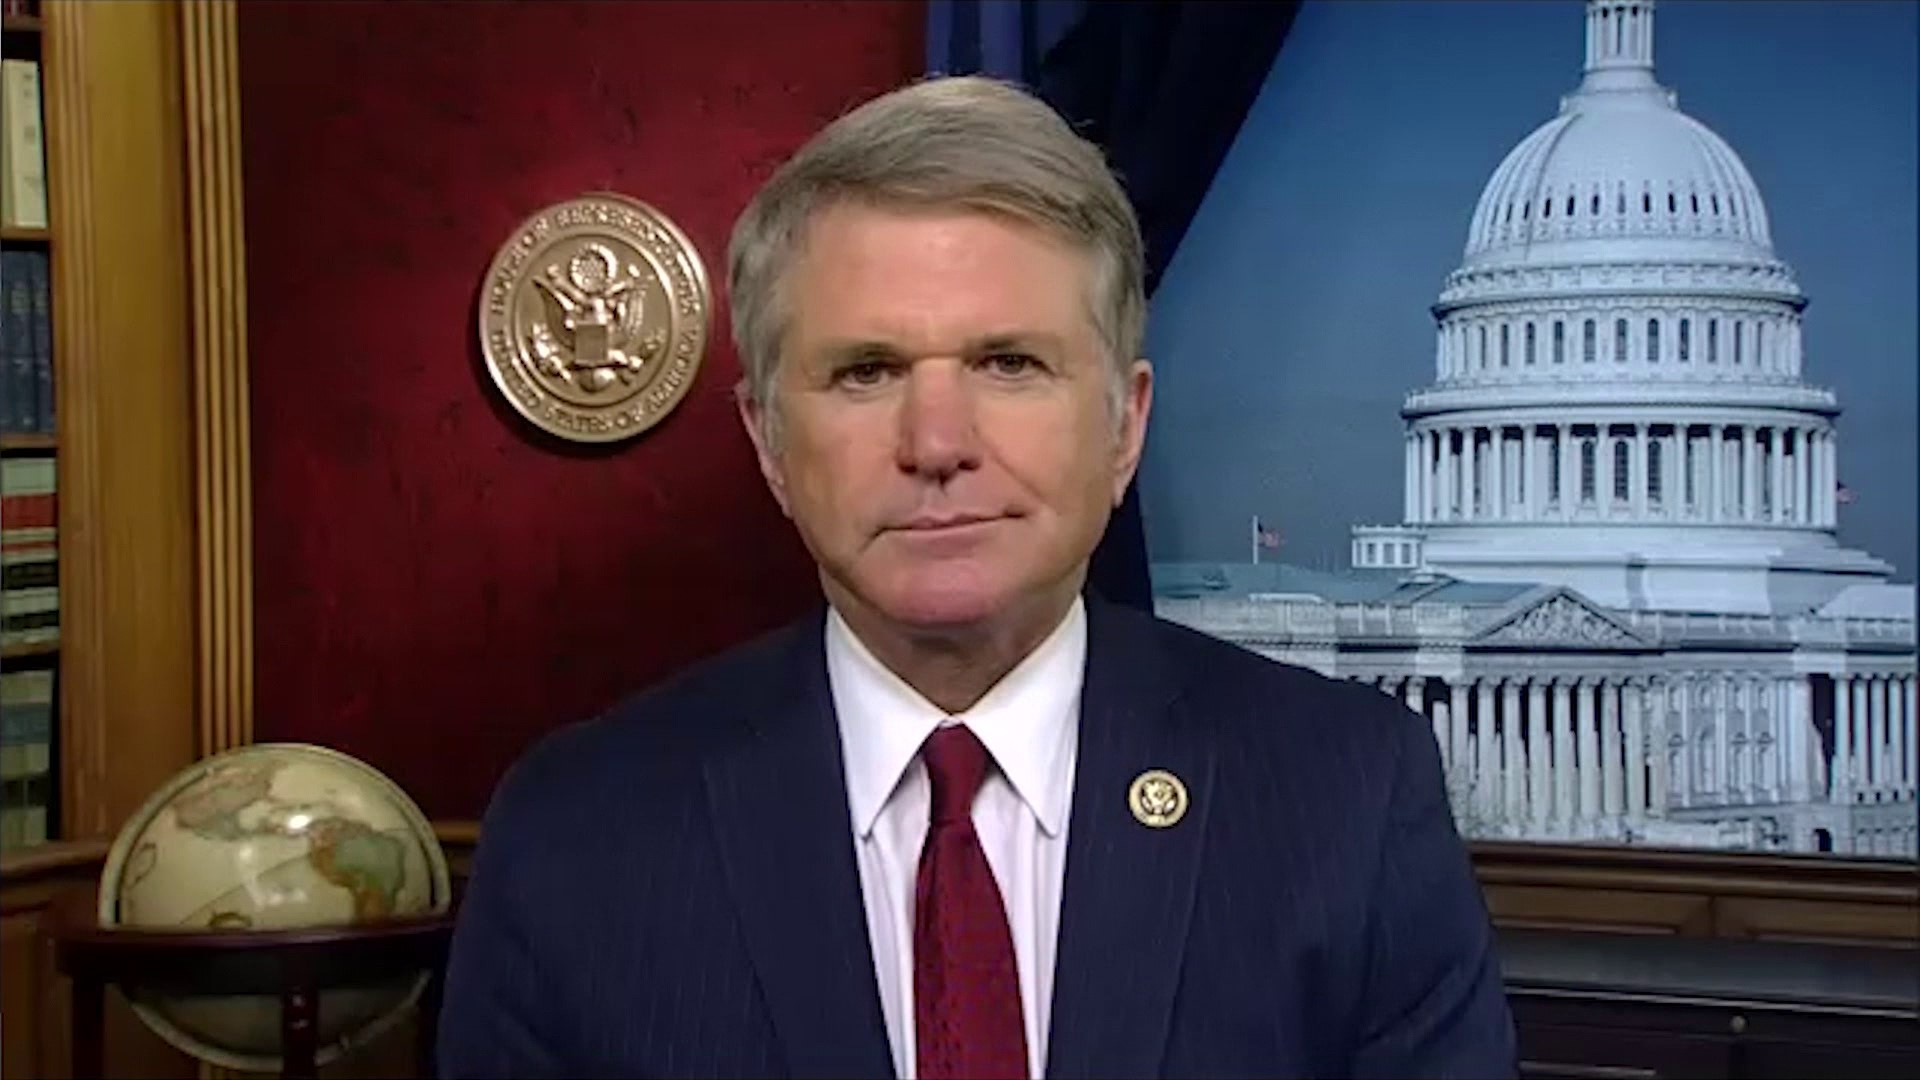 “This is the first time to my knowledge that we’ve seen anything like this from a foreign adversary," Rep. Michael McCaul said.